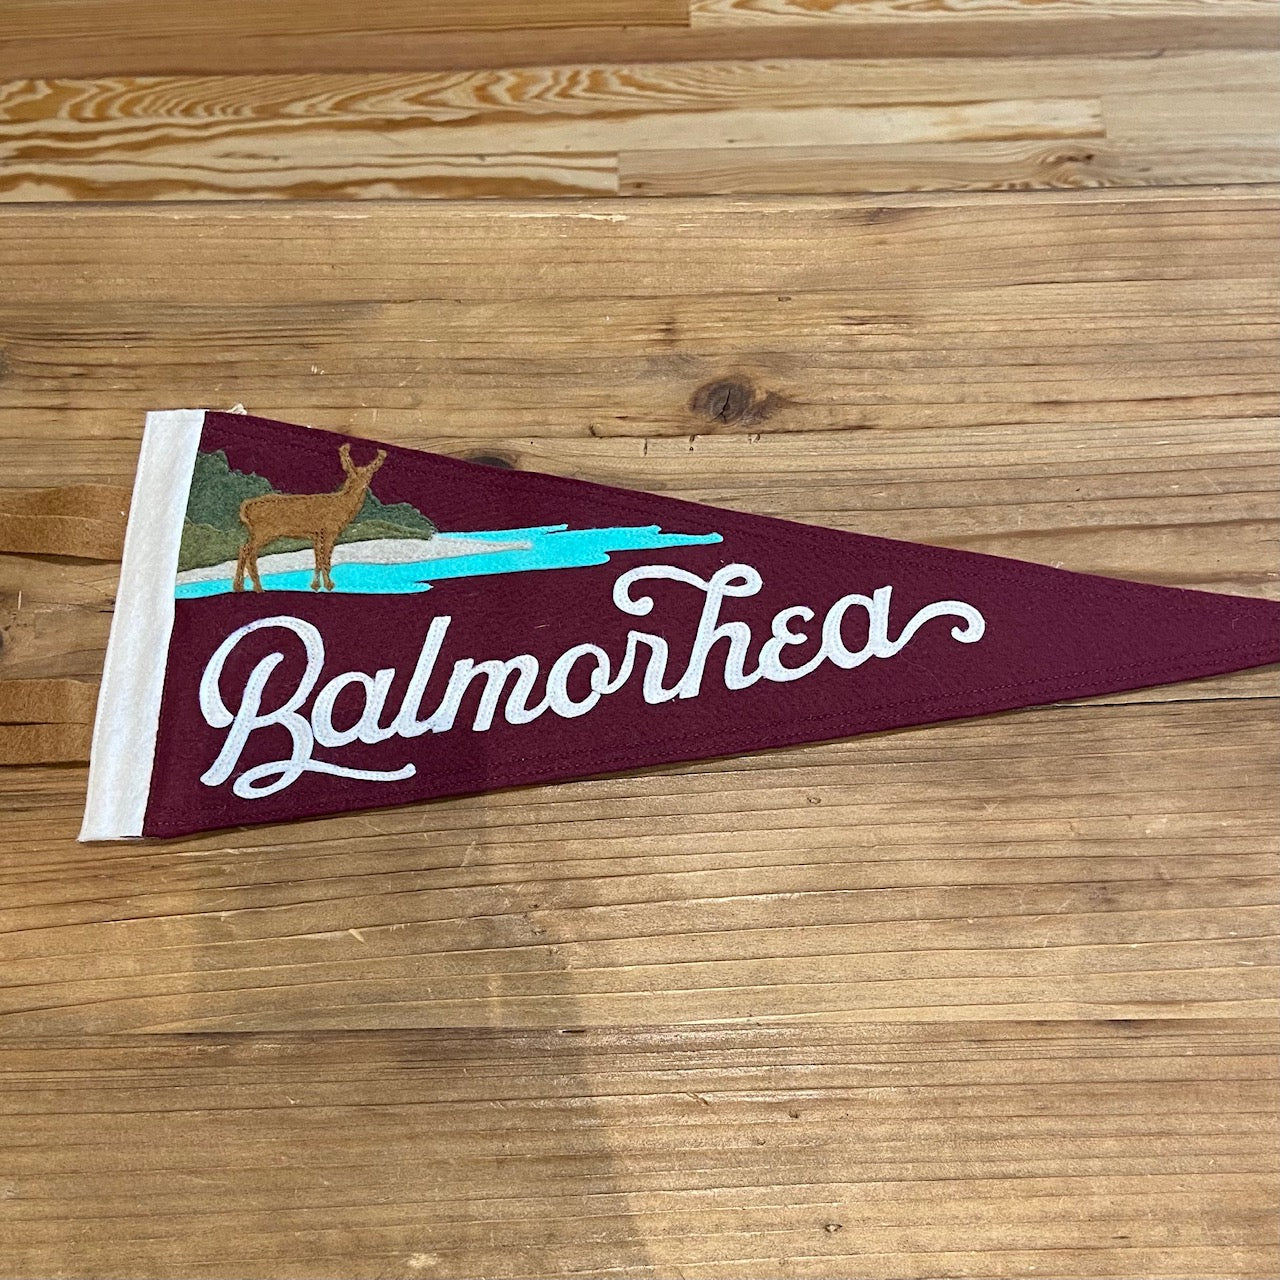 Balmorhea Texas State Park Handmade Felt Pennant at 6Whiskey six whisky in color maroon/wine featuring a deer and water